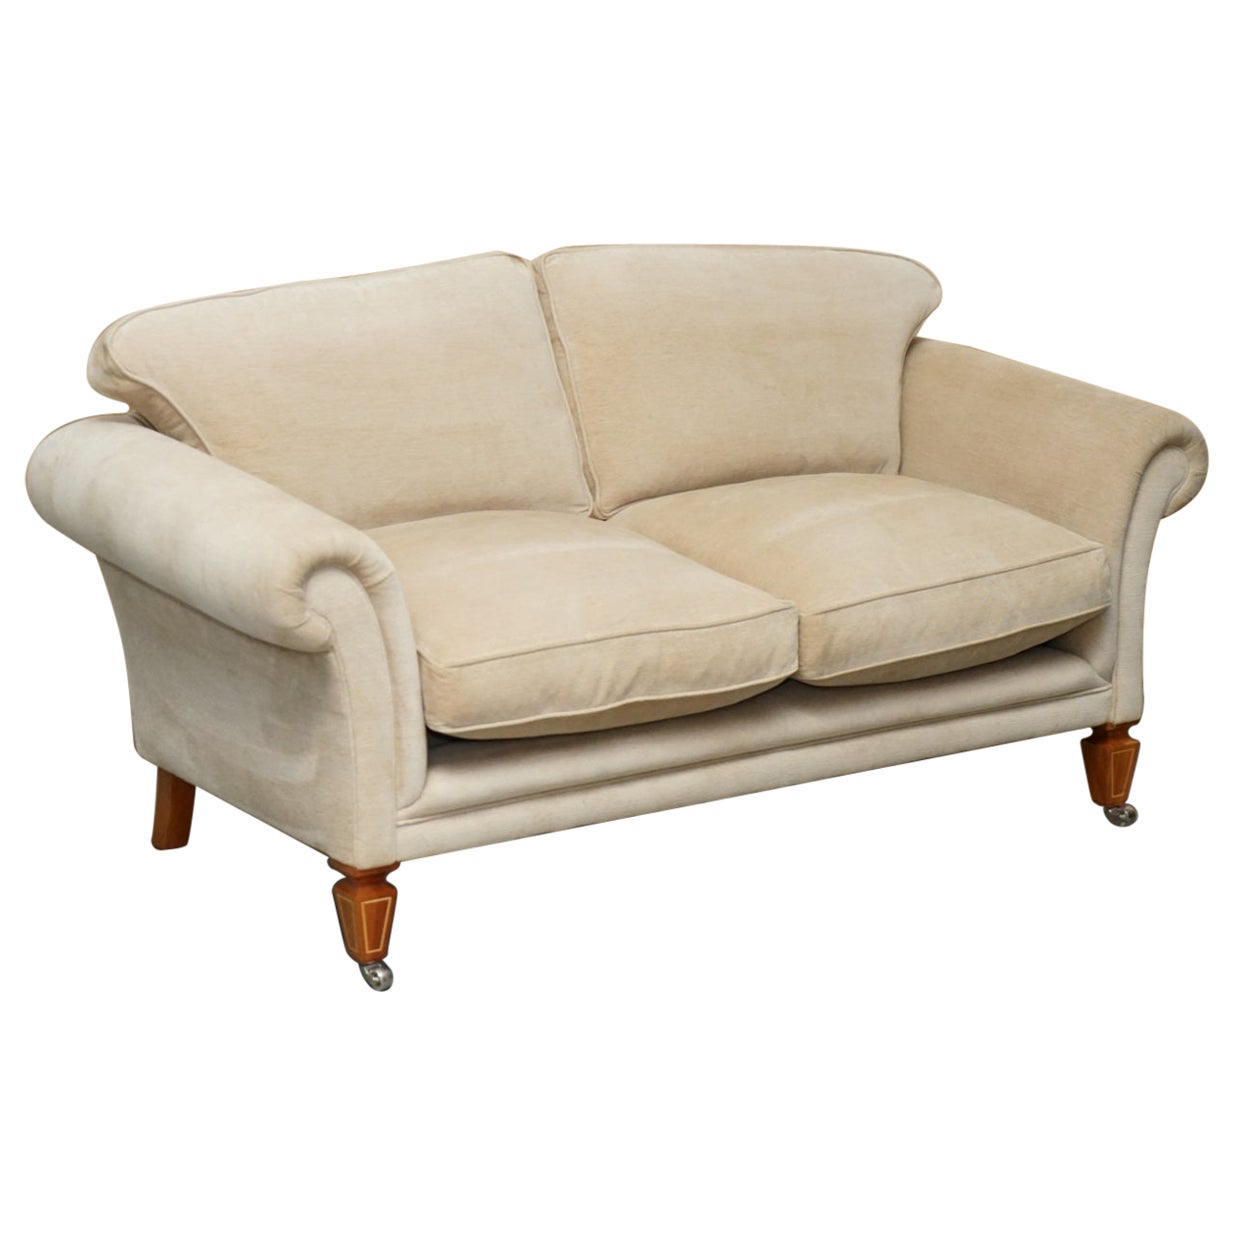 EXQUISITE VISCOUNT DAVID LINLEY TWO SEAT SOFA WiTH STAMPED CASTORS For Sale